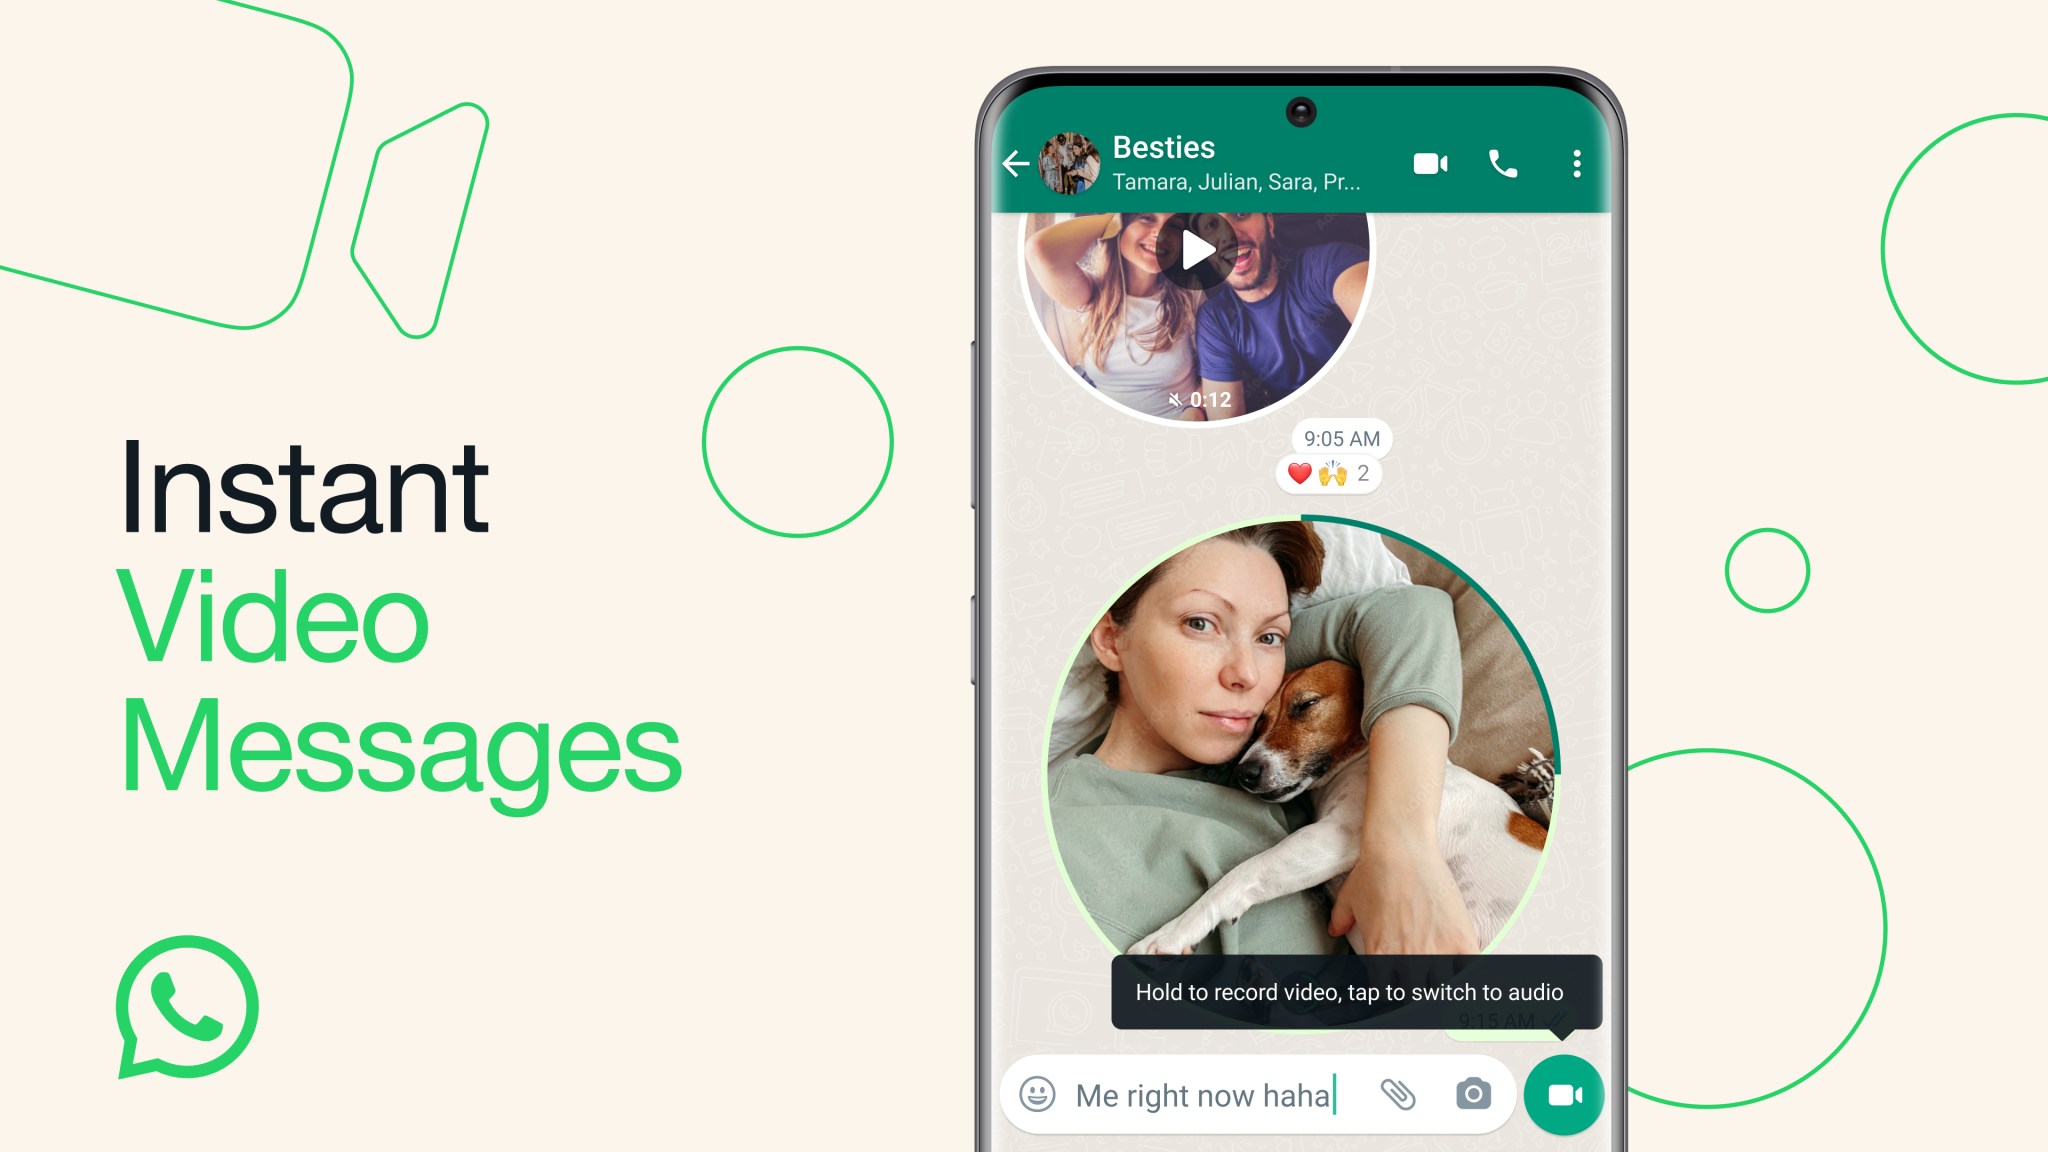 WhatsApp now has the ability to send video messages